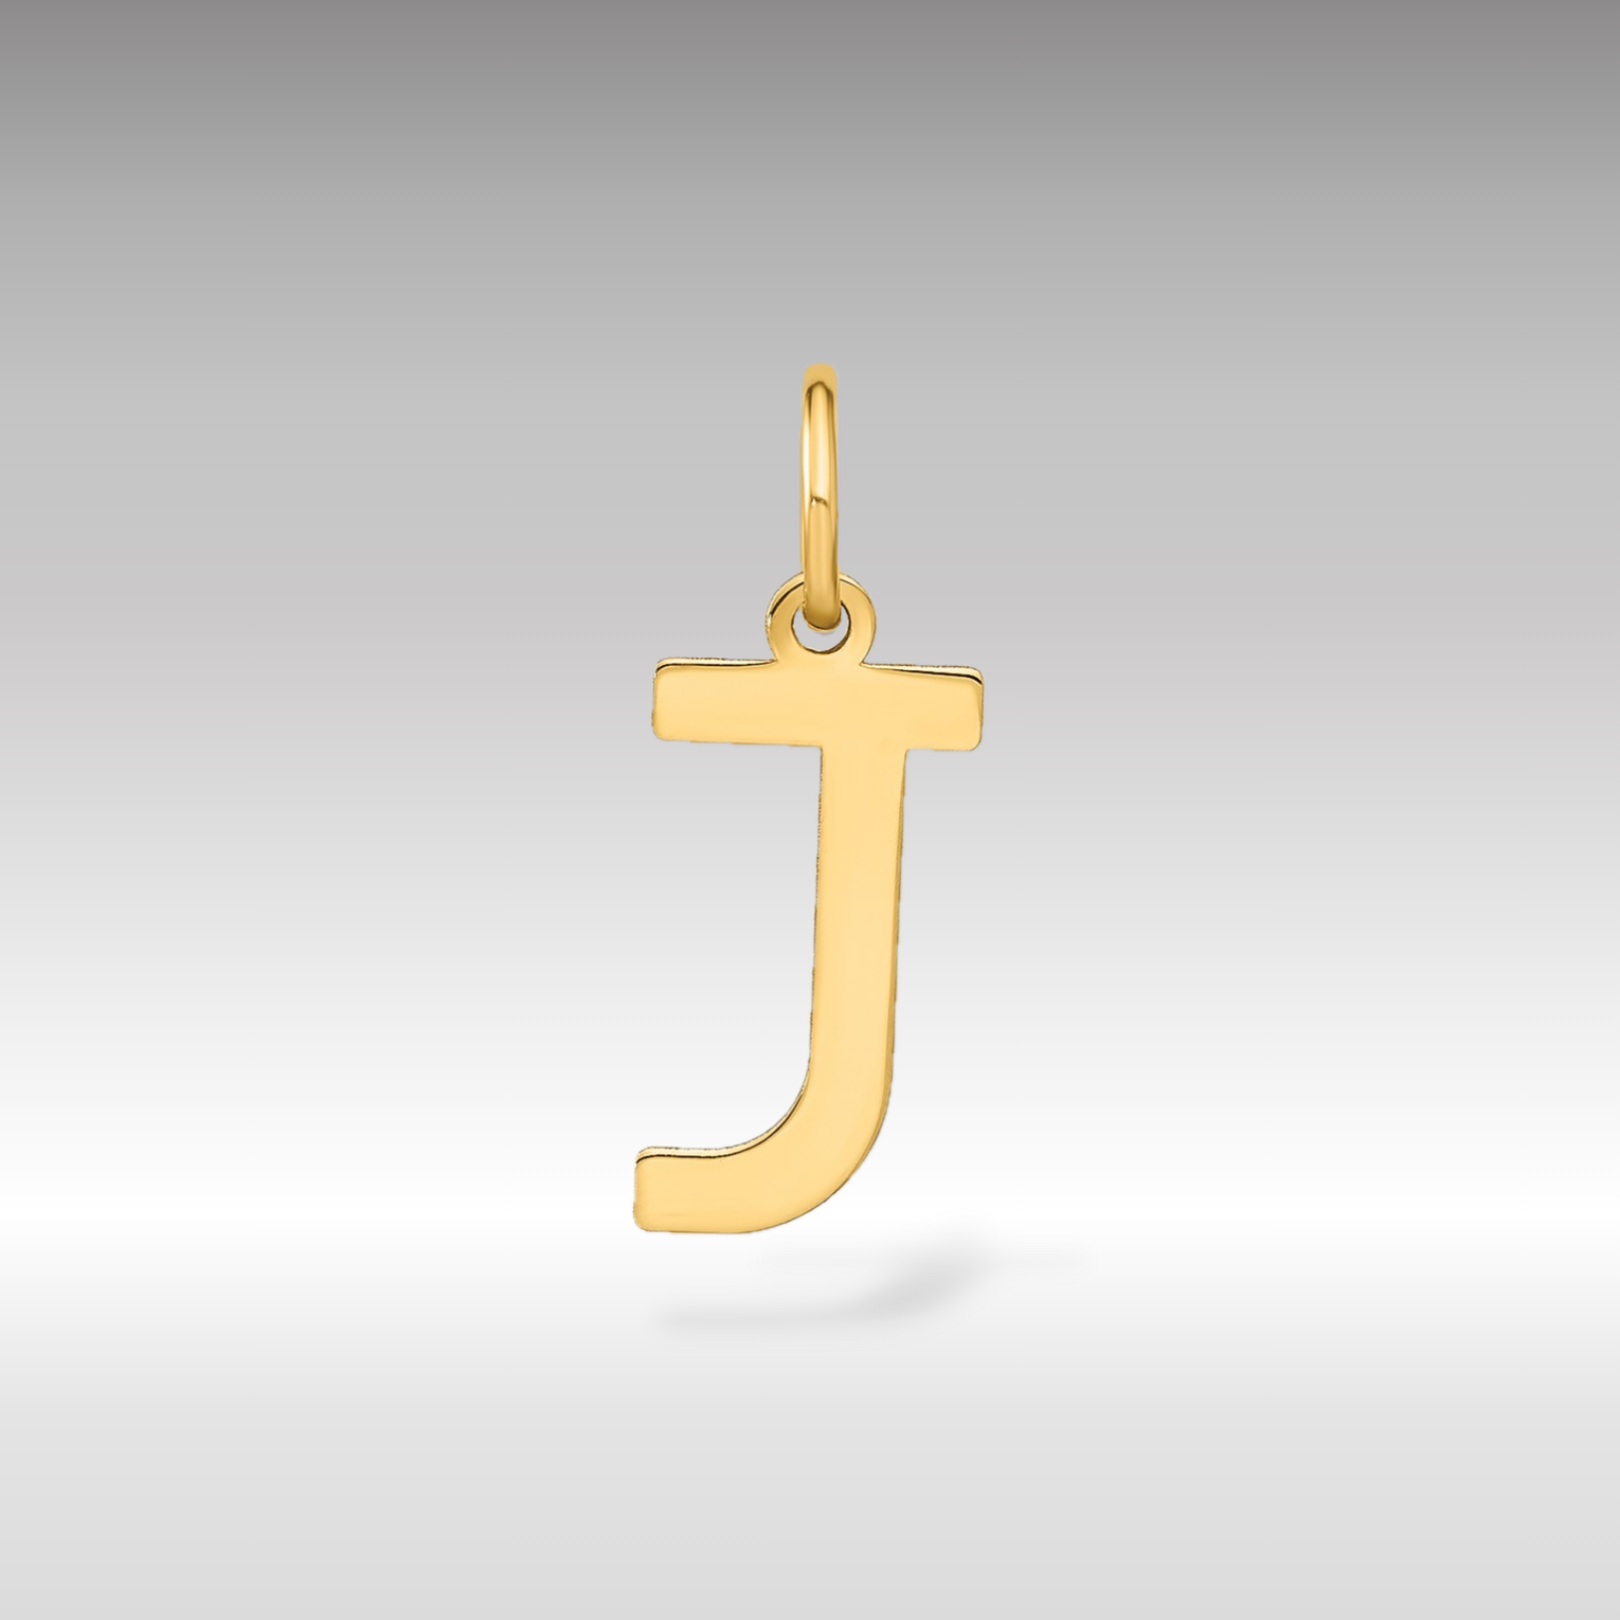 14K Gold Letter "J" Initial Pendant - Charlie & Co. Jewelry